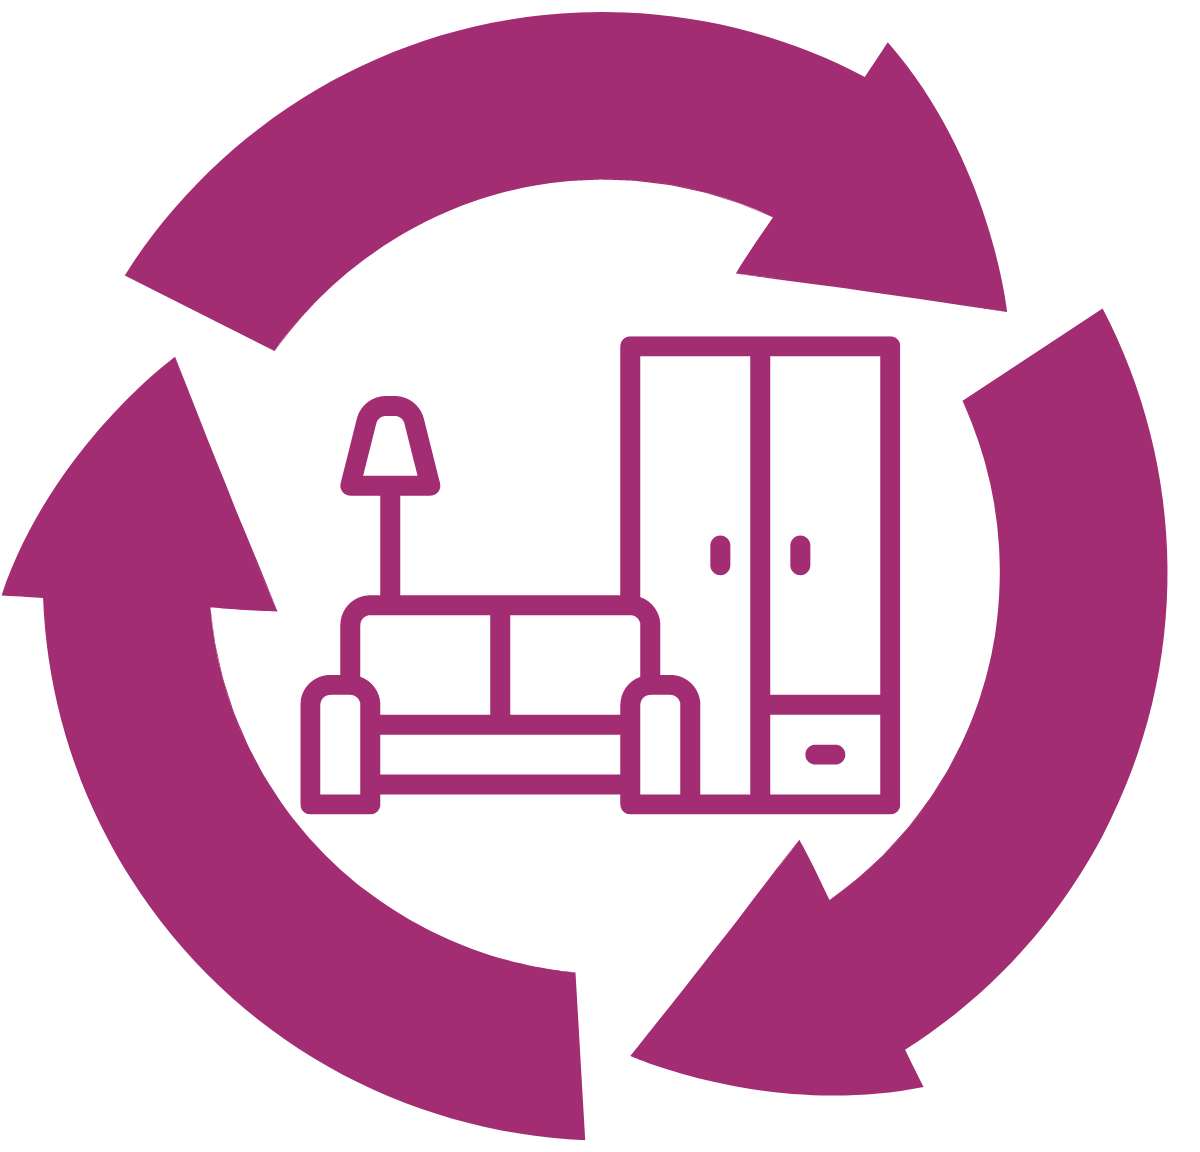 Pink icon of a recycling symbol with furniture in the middle to demonstrate furniture recycling.